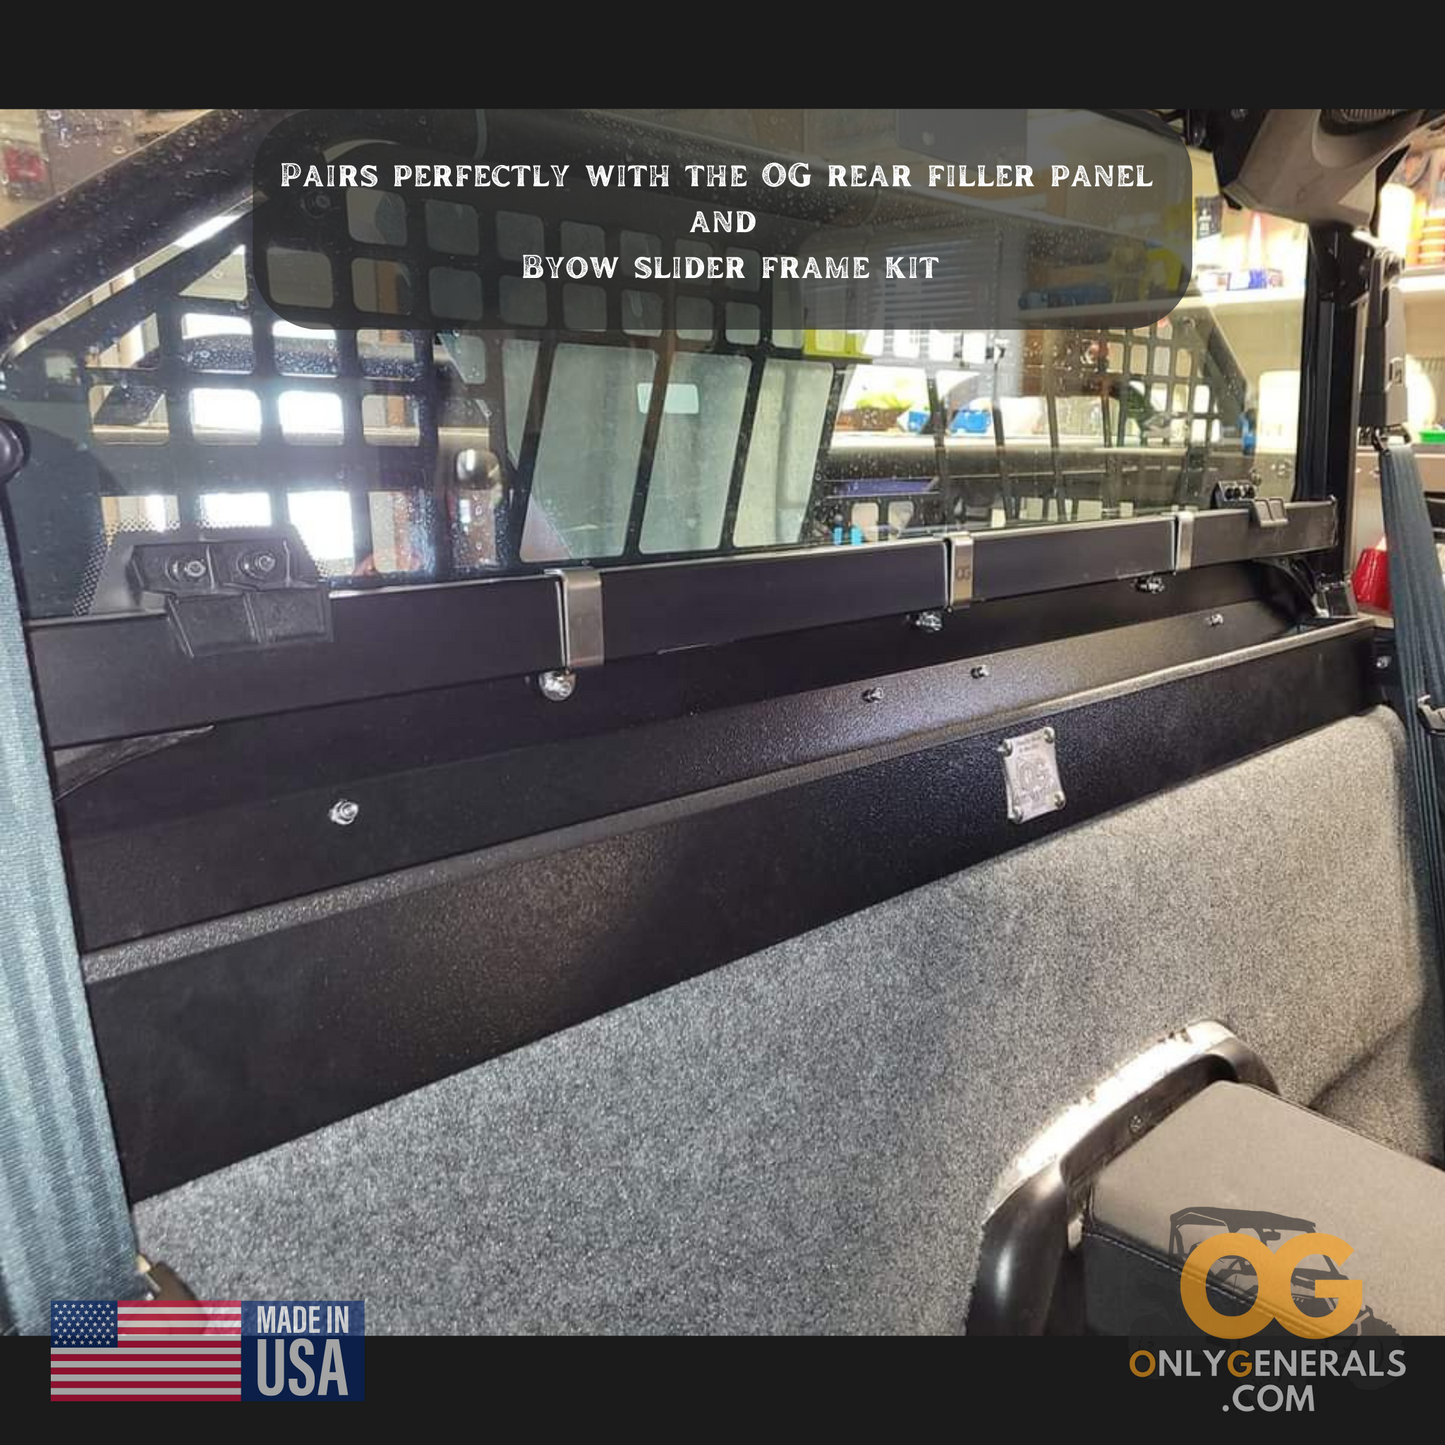 Customer submission of the OnlyGenerals full length storage tray for the polaris general mounted to the OG rear filler panel